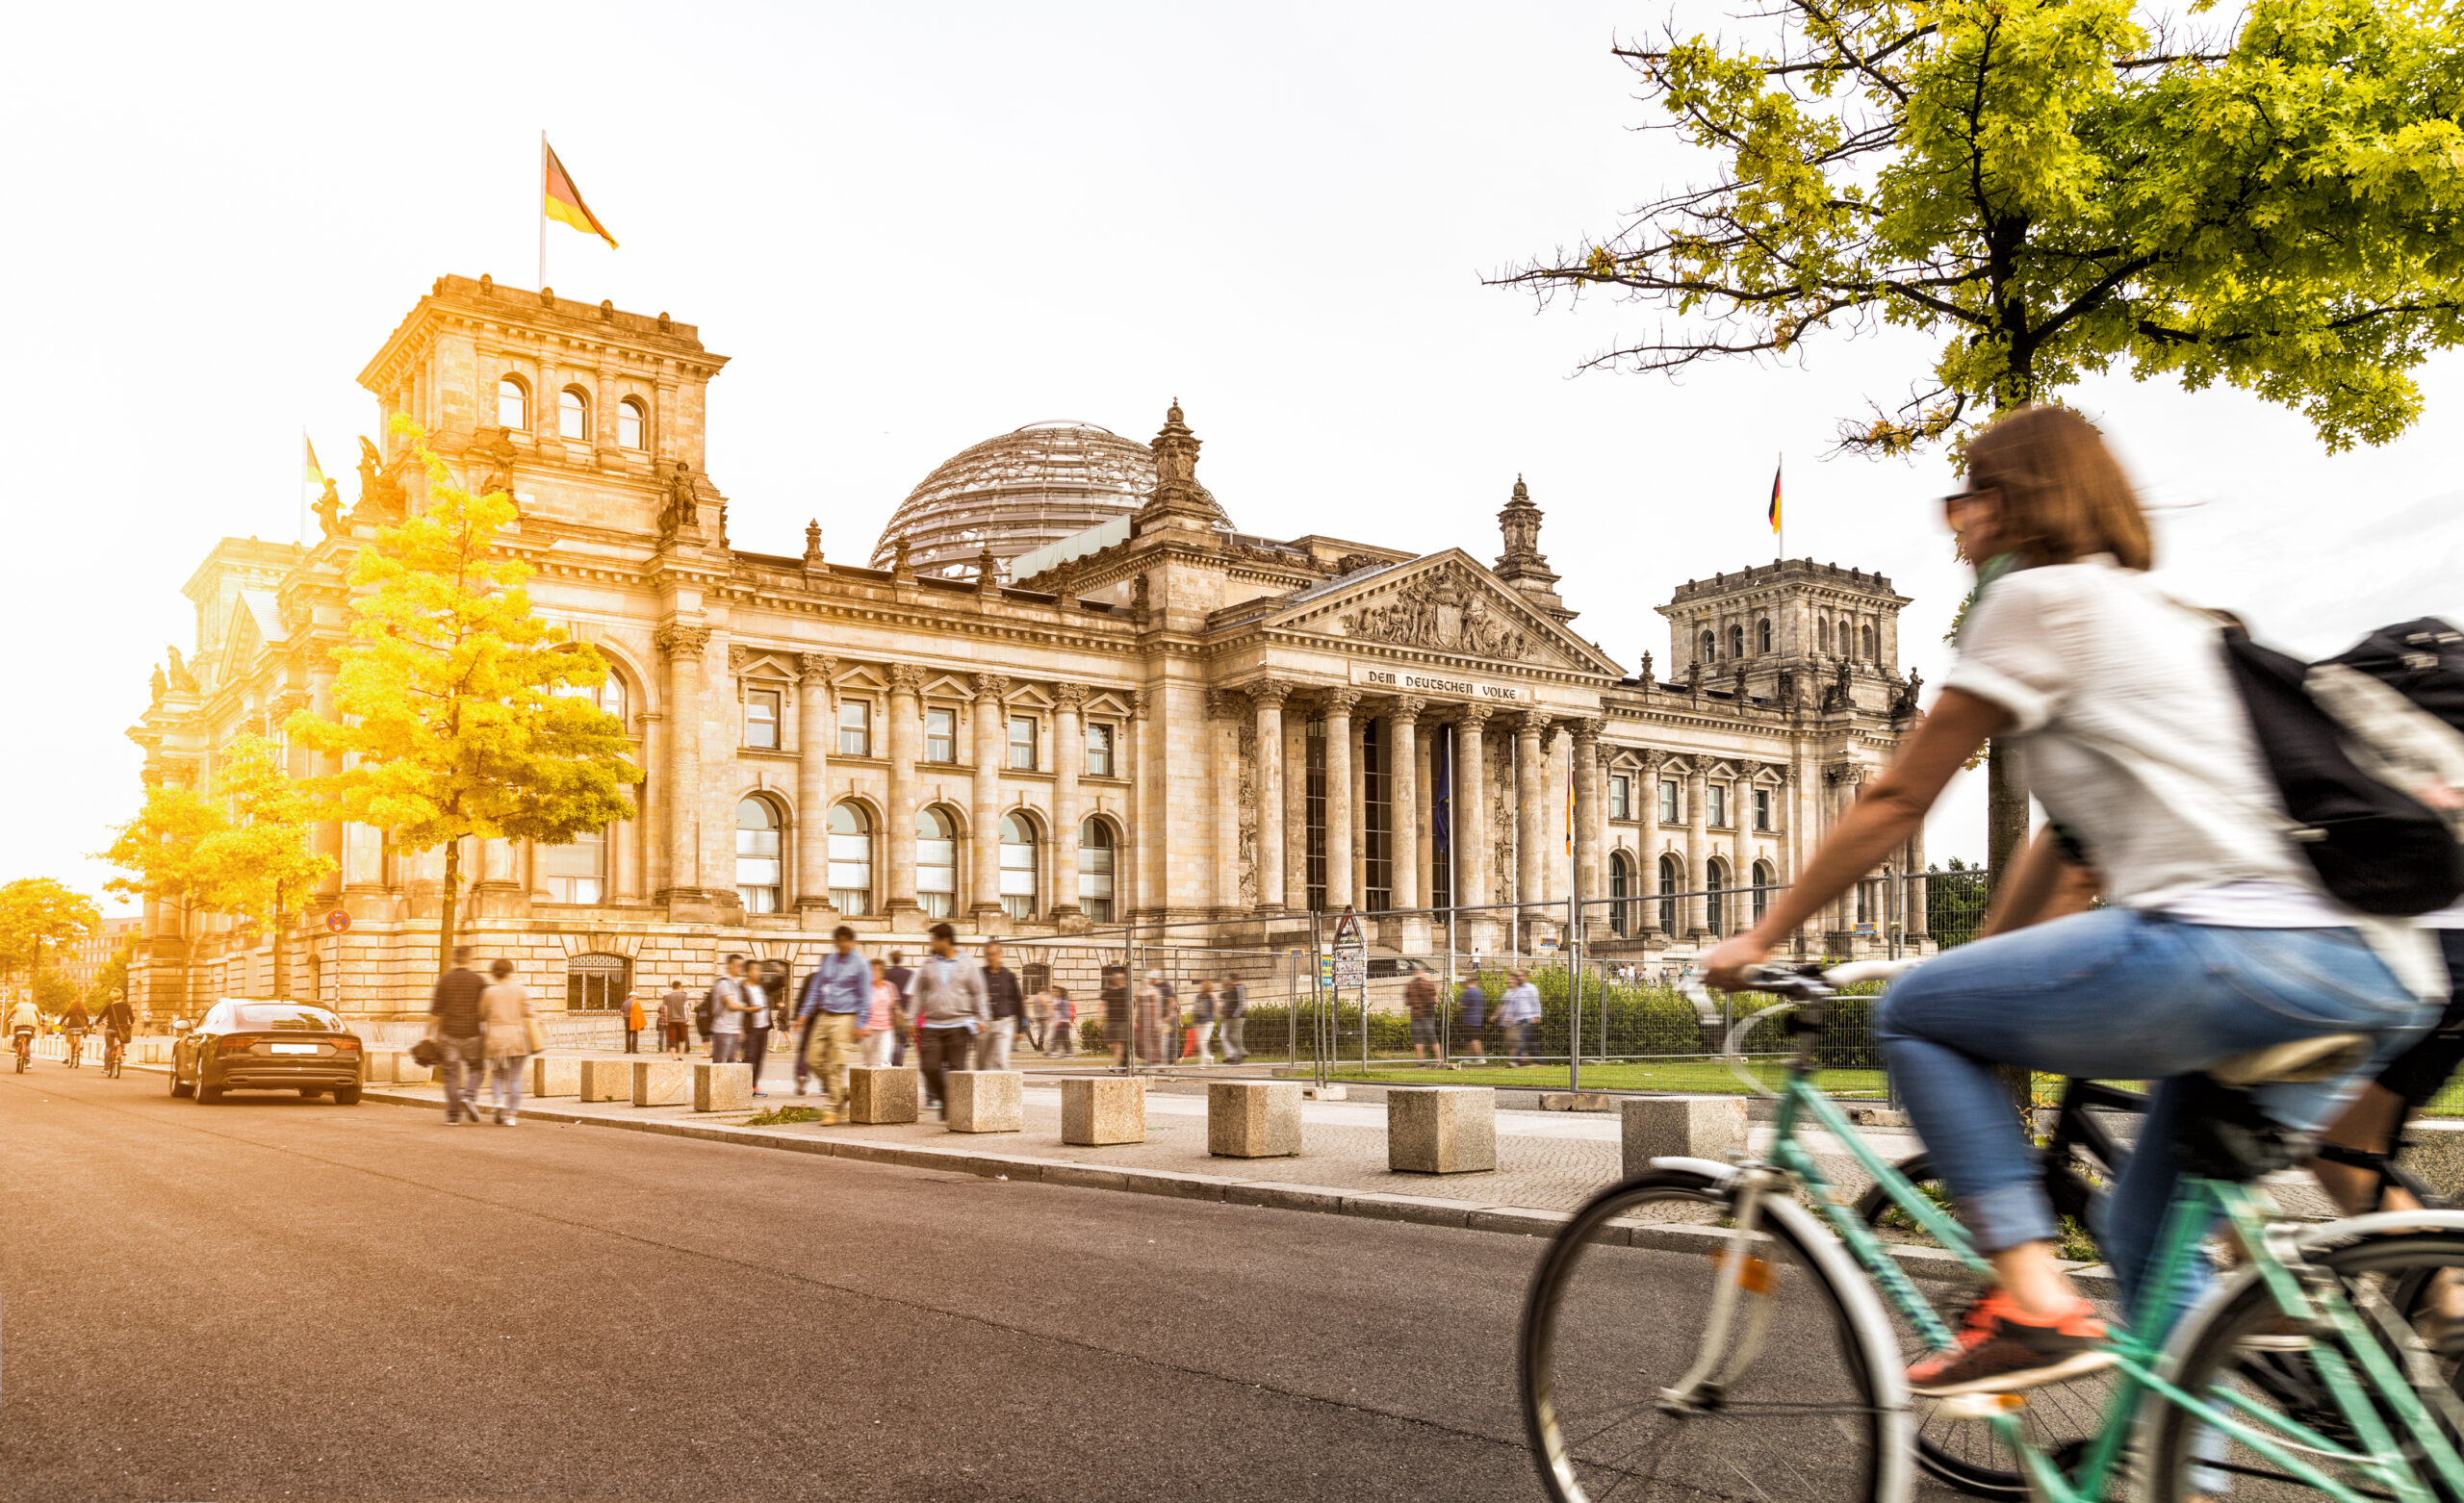 A person rides on a bike next to a building in Berlin. There is a tree to her right.